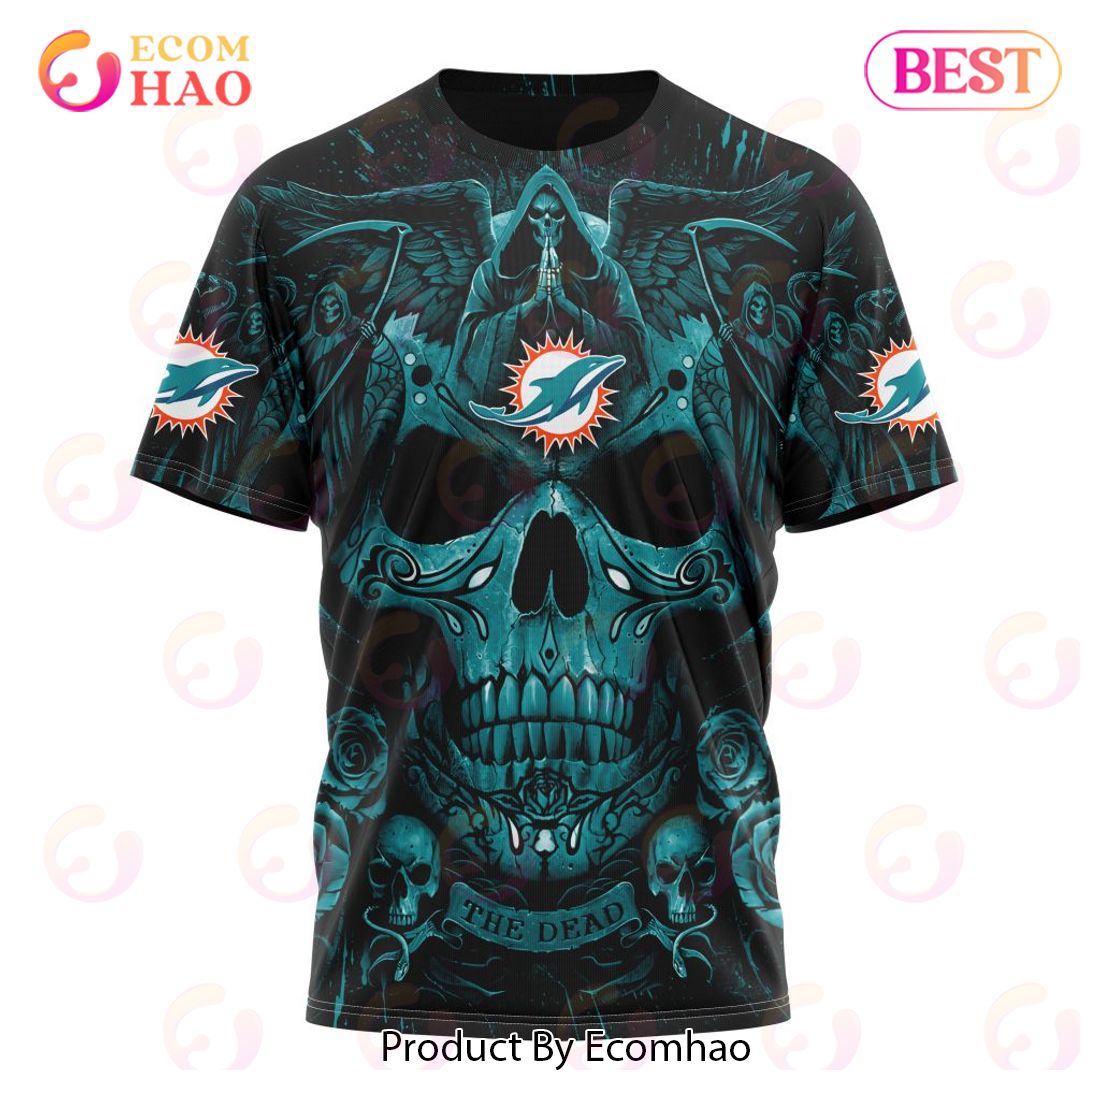 Miami Dolphins Shop - NFL Miami Dolphins Special Design With Skull T shirt